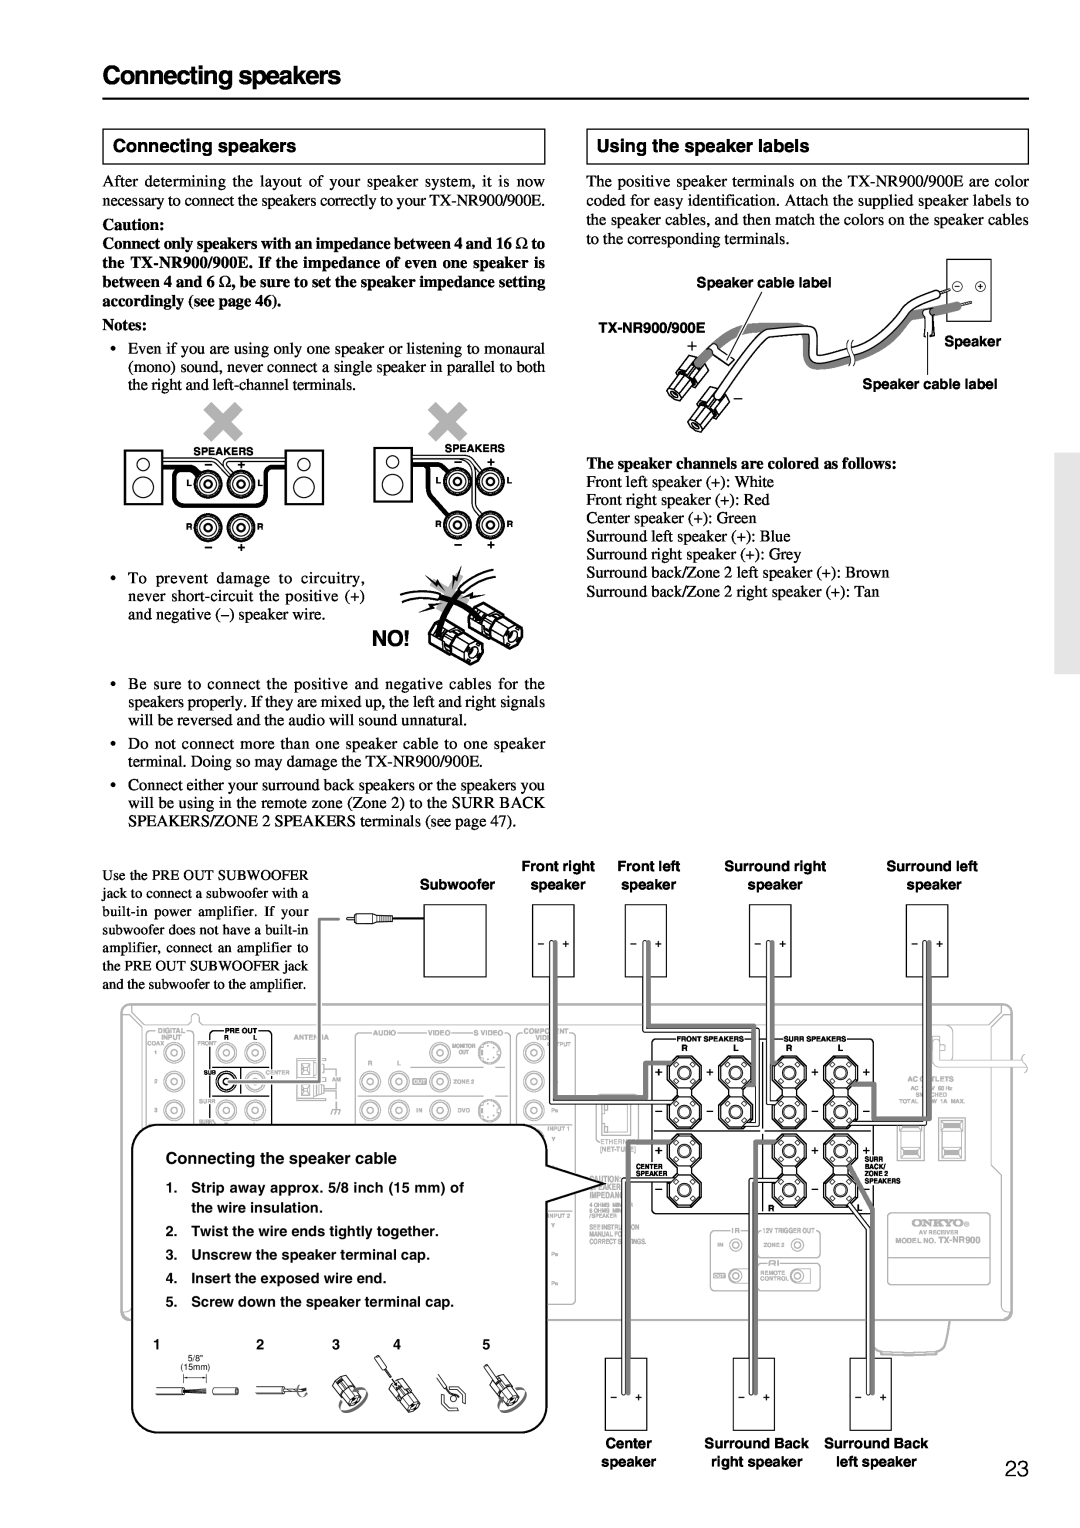 Onkyo TX-NR900E instruction manual Connecting speakers, Using the speaker labels, cable 